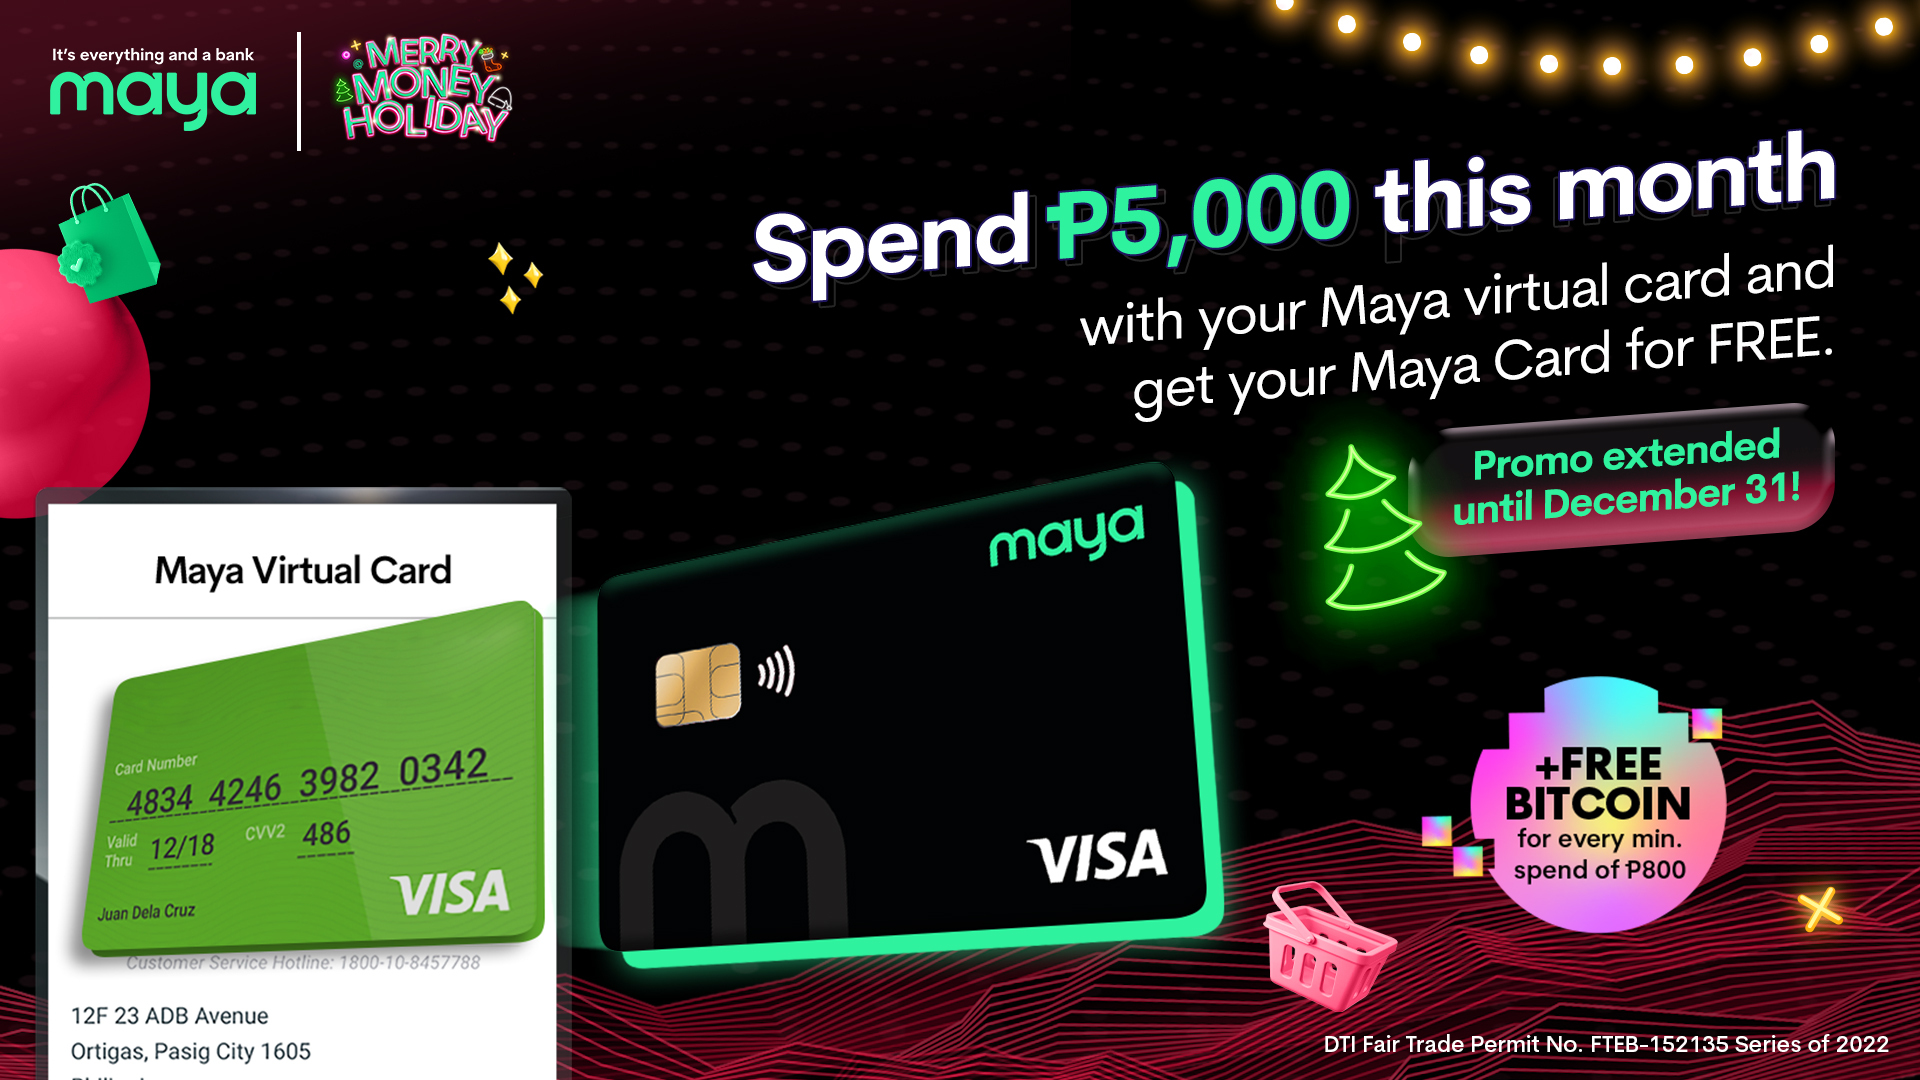 Use your virtual Maya card and get a FREE physical card!